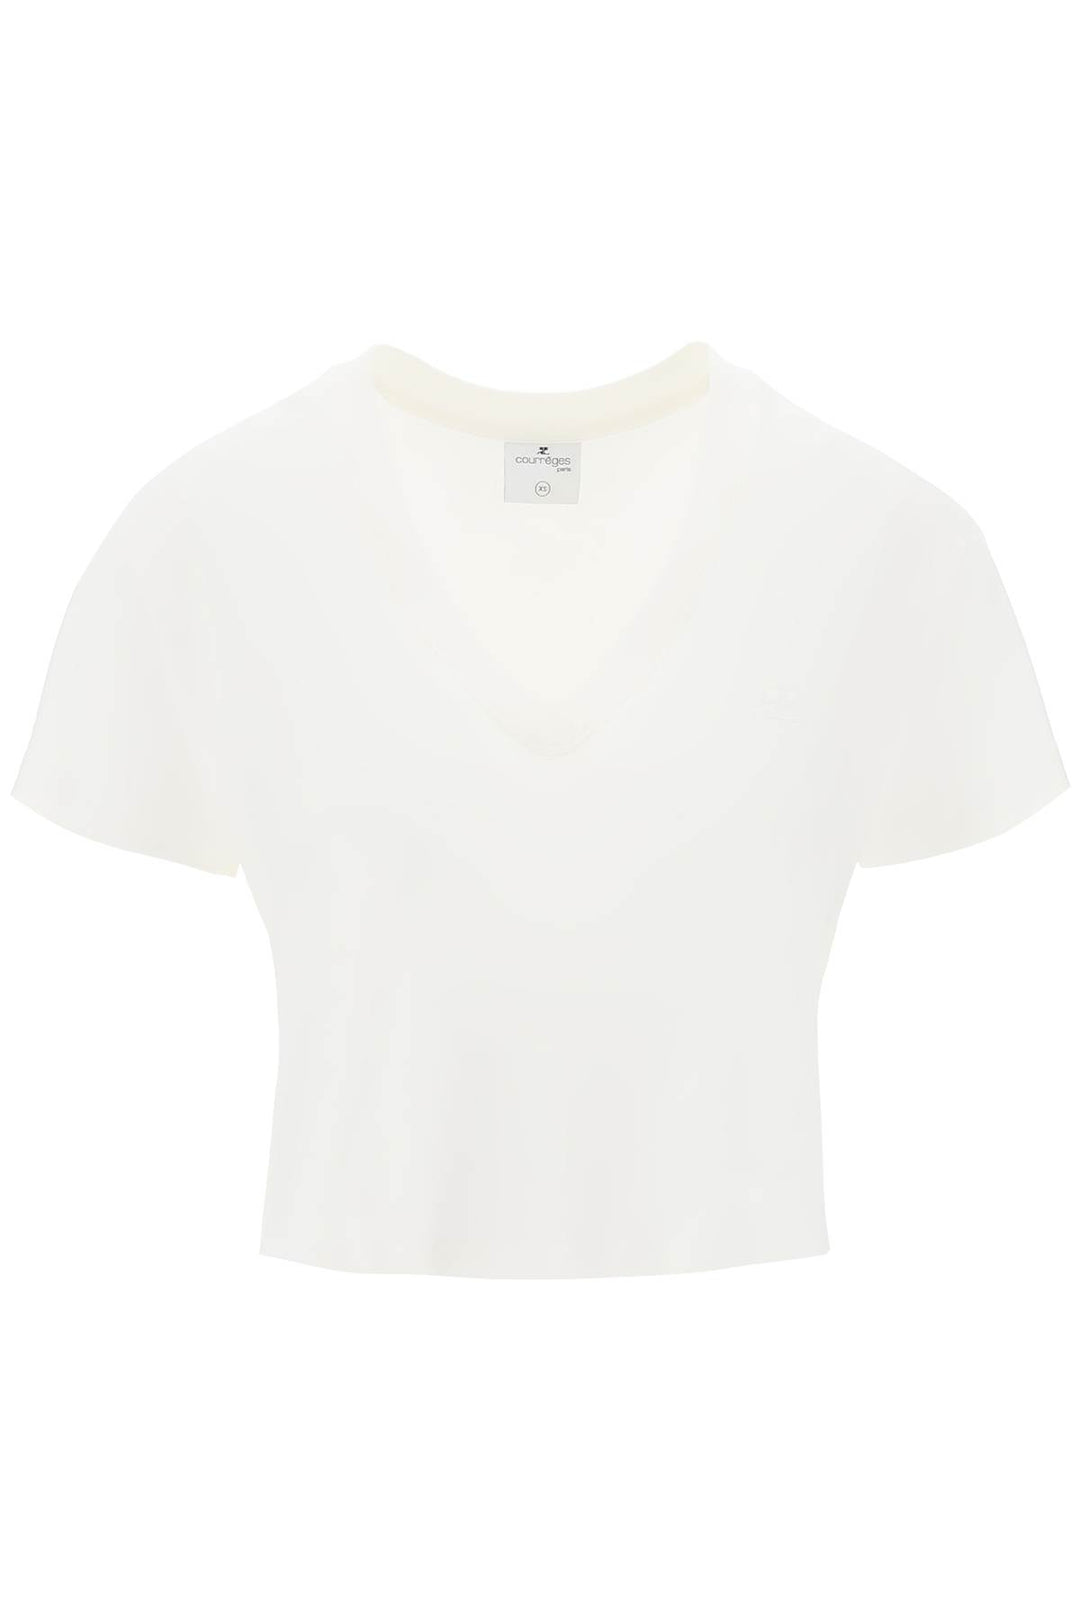 Courreges cropped logo t-shirt with-0